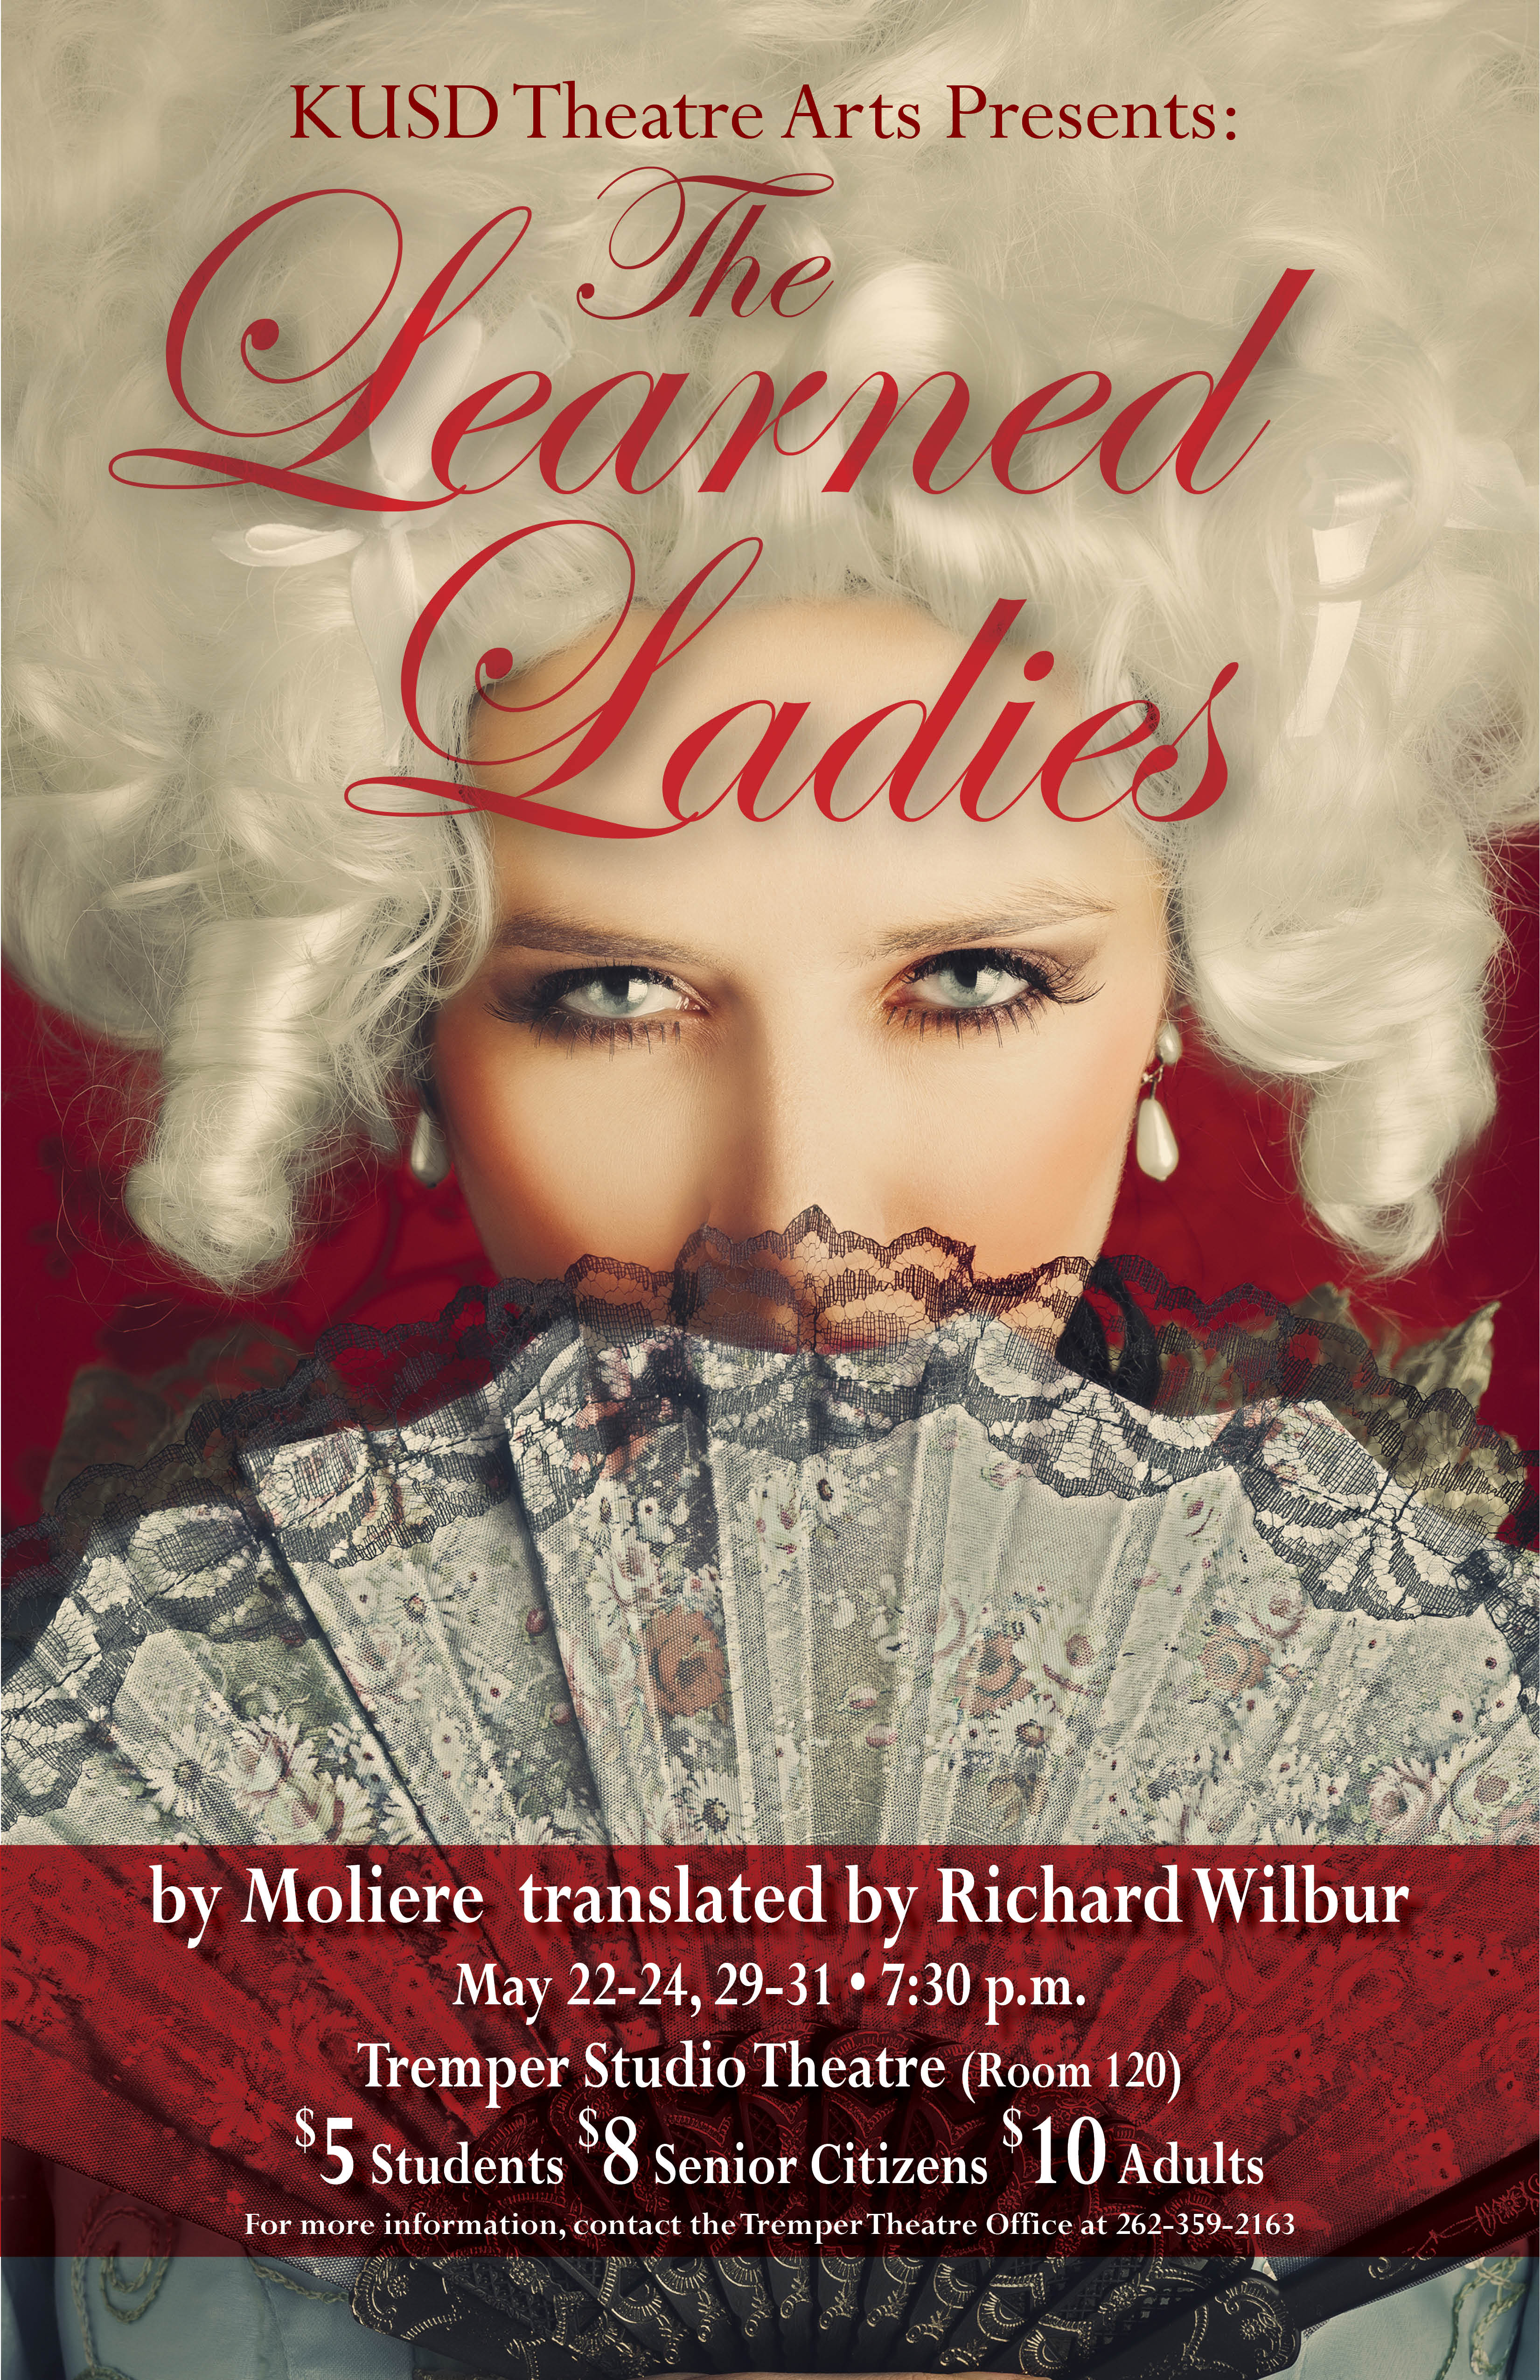 The poster for The Learned Ladies